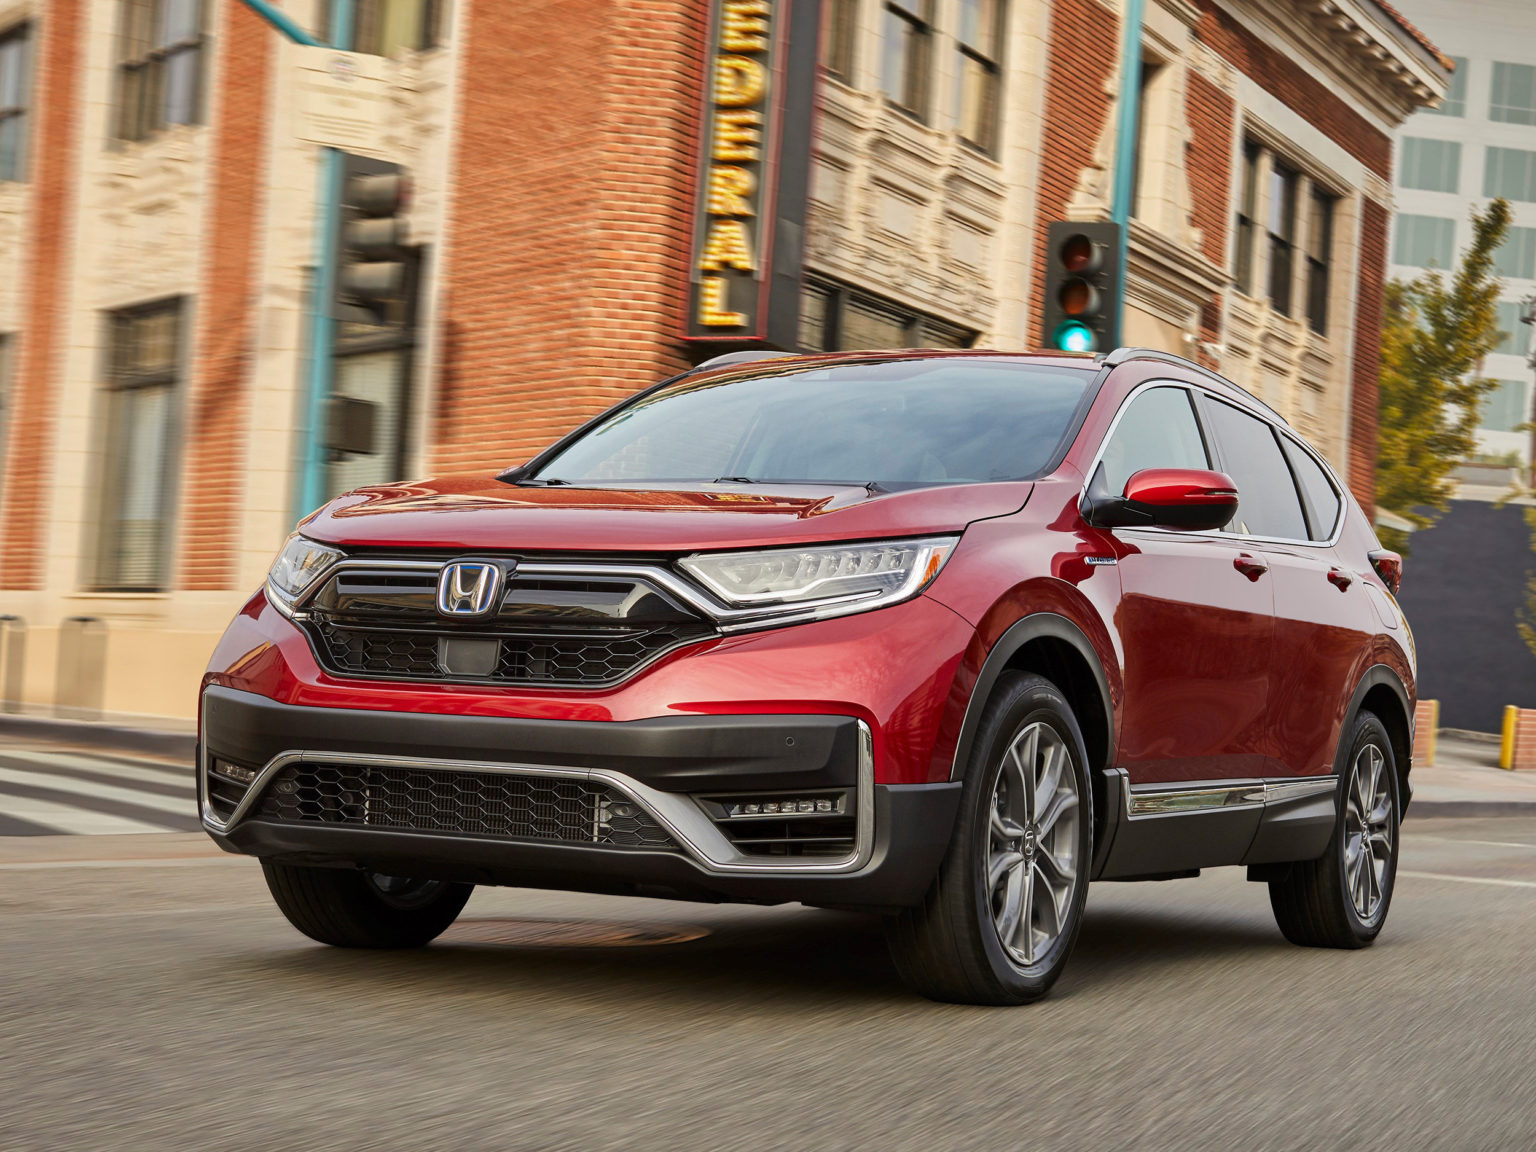 The Honda CR-V Hyrbid is new to the lineup for 2020.